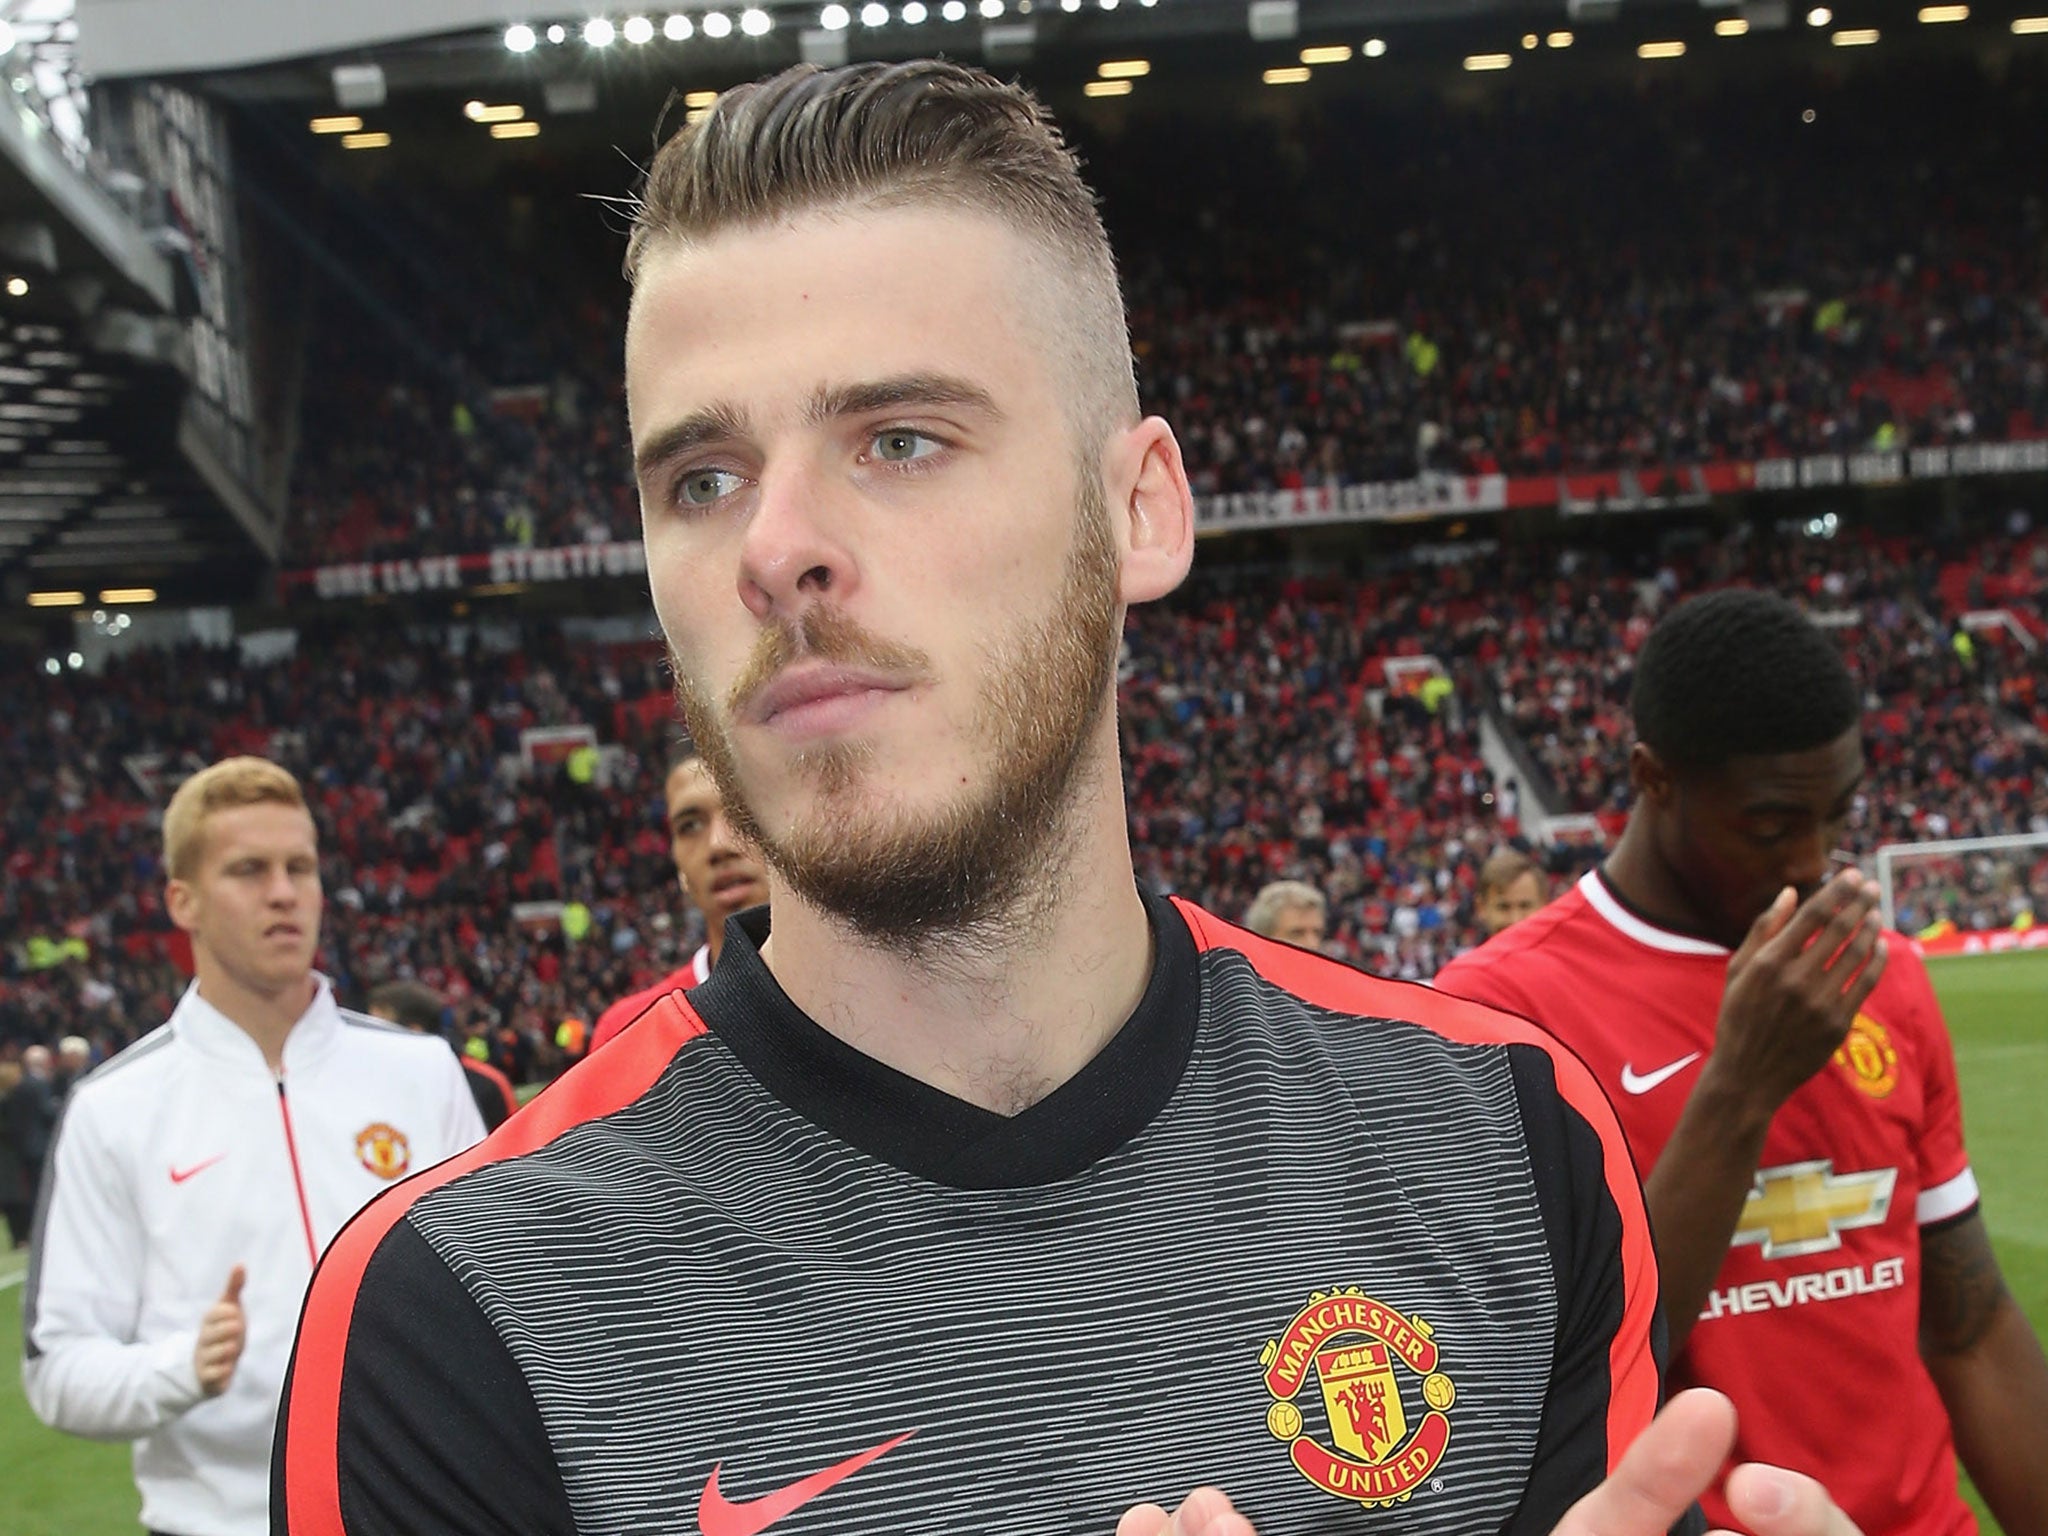 David de Gea is in the Manchester United squad for the US despite being linked with Real Madrid